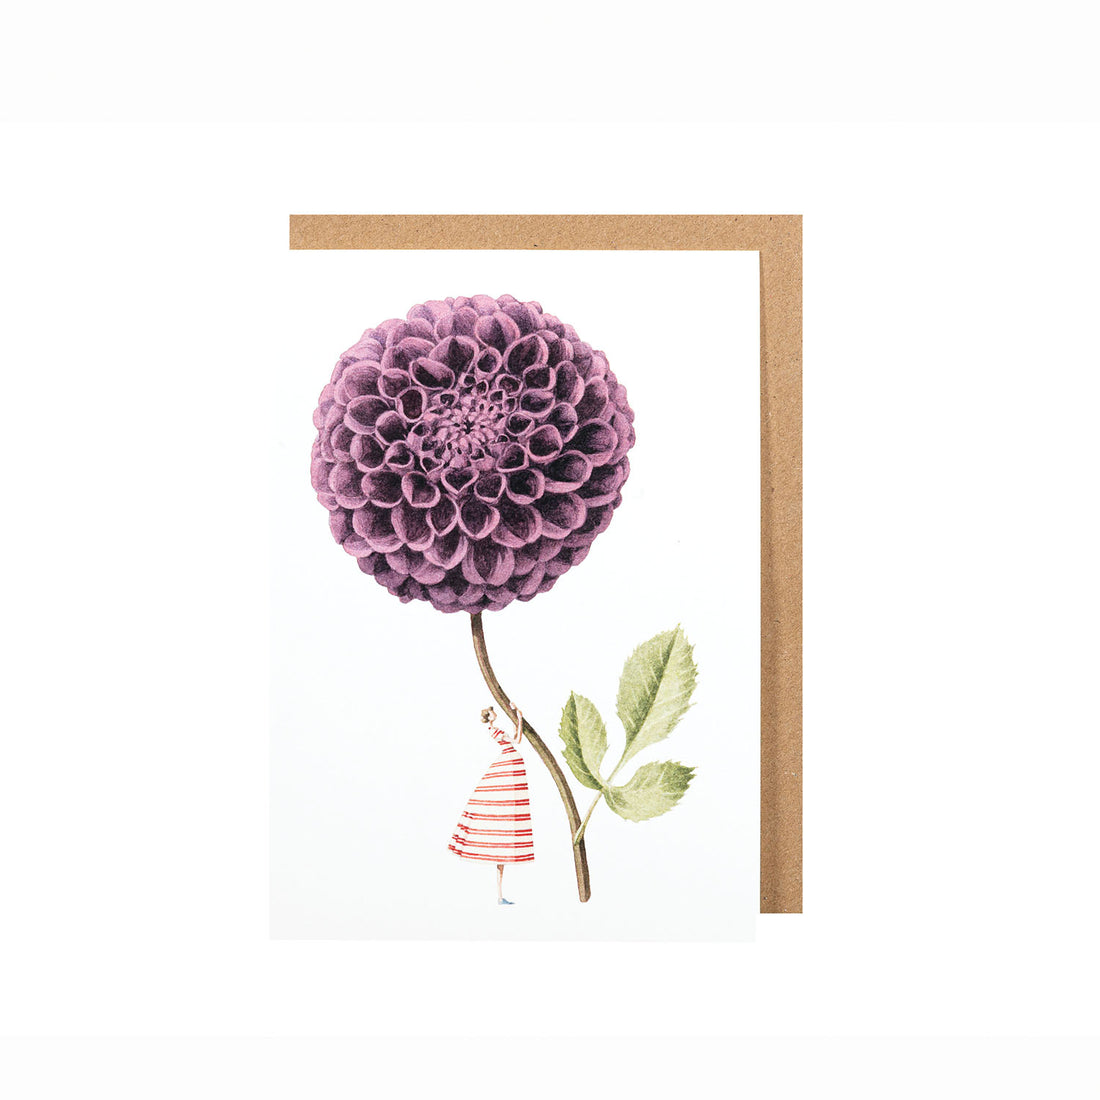 A Purple Dahlia Greeting Card featuring Laura Stoddart holding it, celebrating environmentally sustainable practices by Hester &amp; Cook.